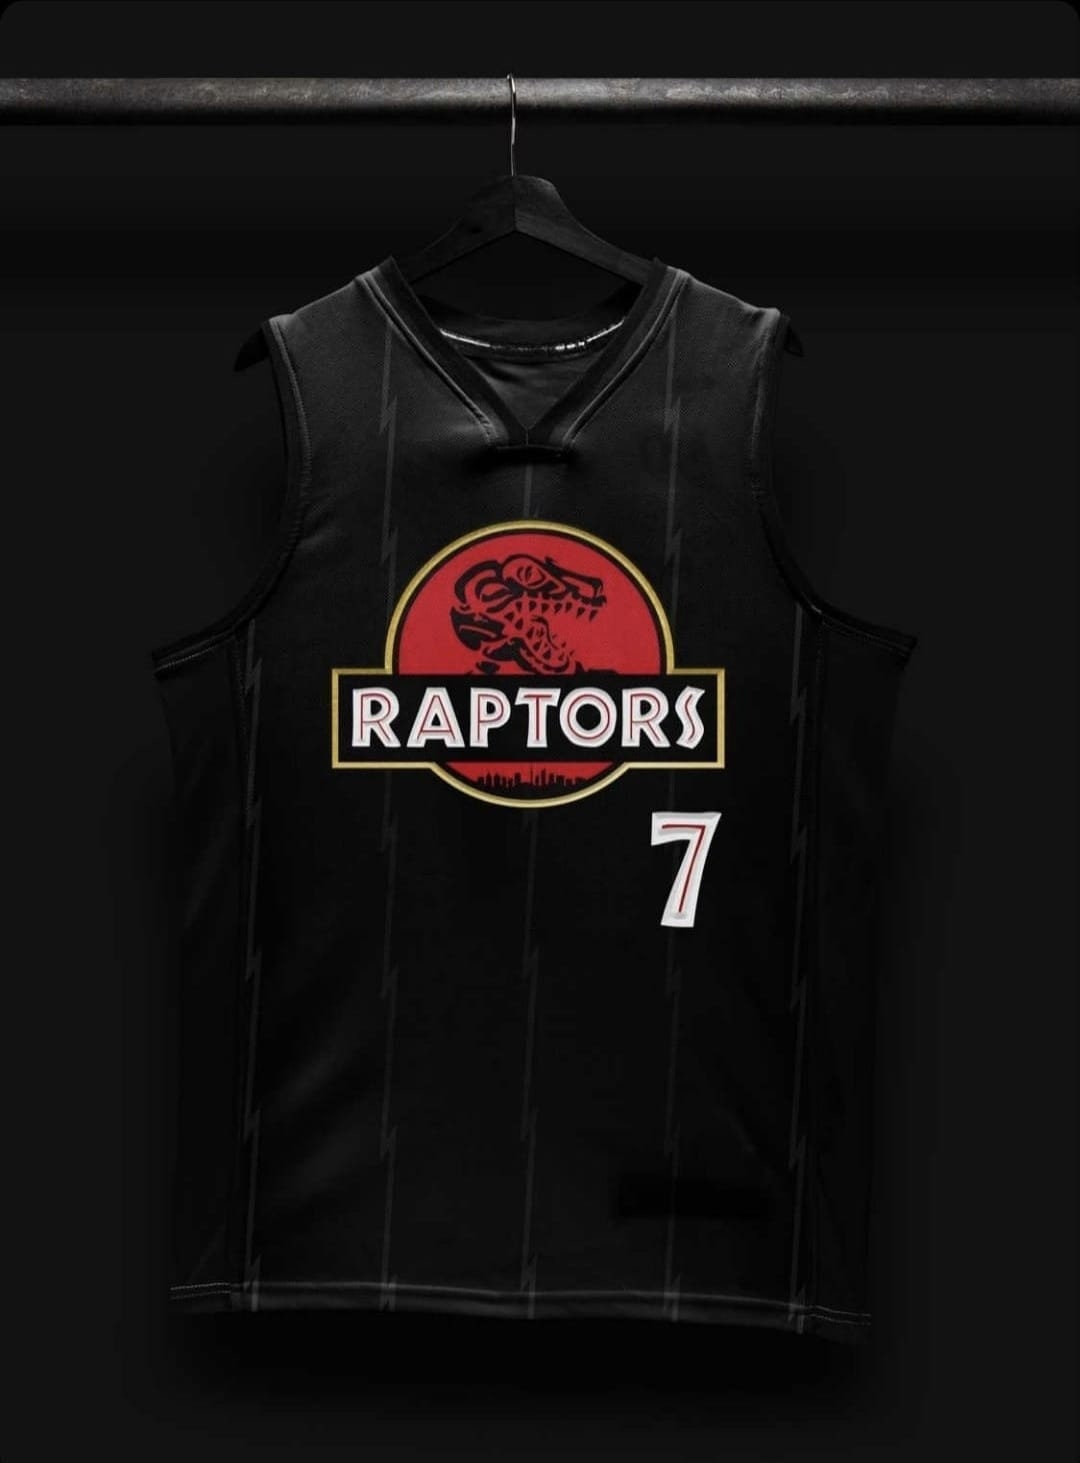 US$ 26.00 - Raptors KNOW YOURSELF #6 Purple Retro Top Quality Hot Pressing NBA  Jersey 